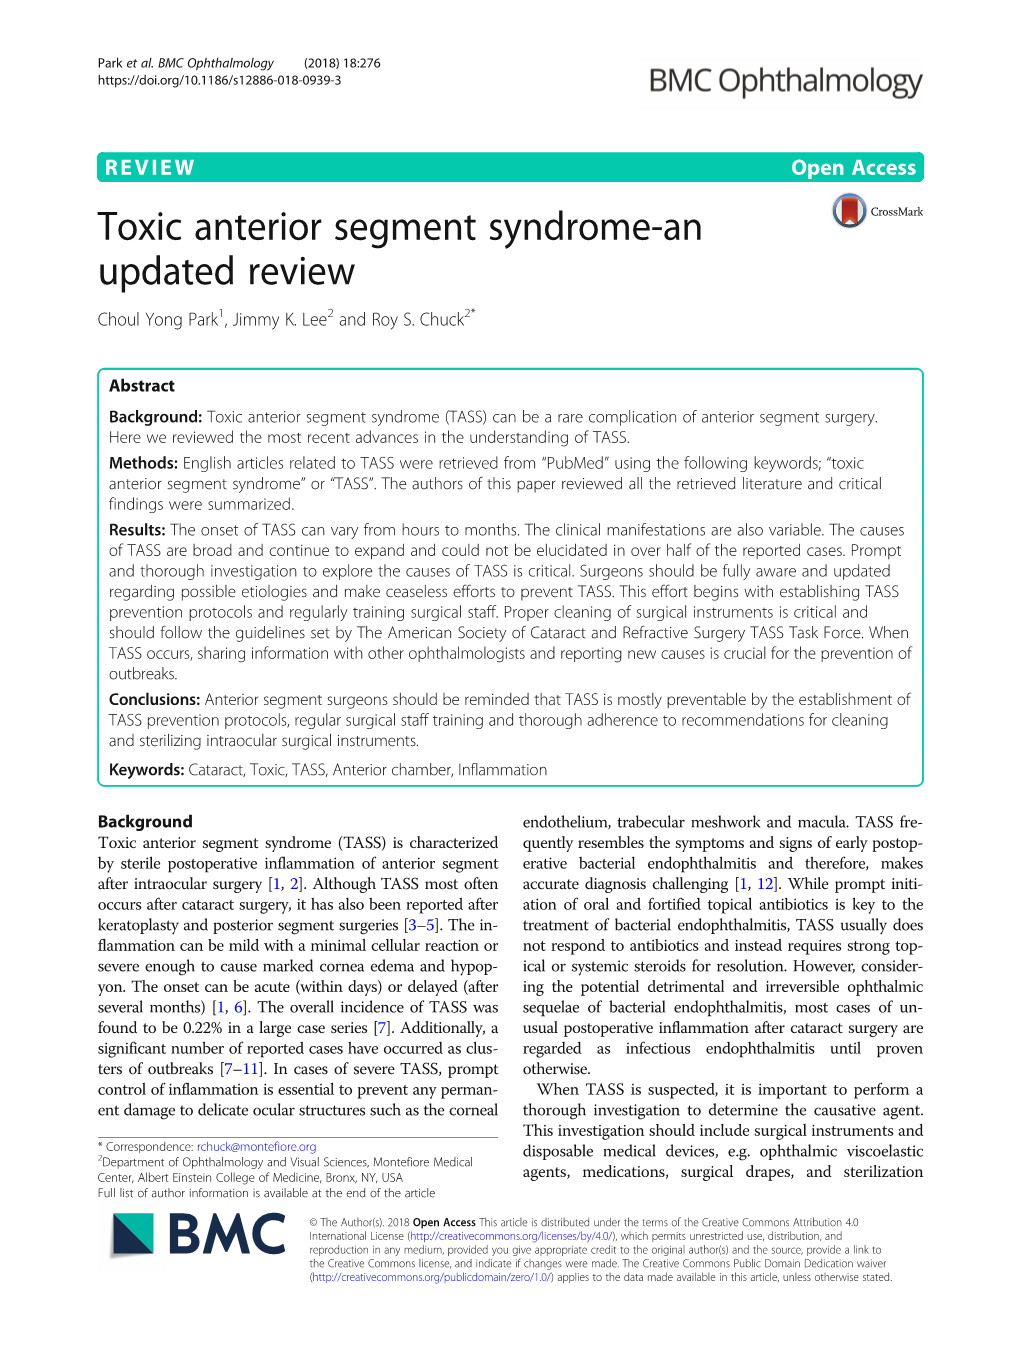 Toxic Anterior Segment Syndrome-An Updated Review Choul Yong Park1, Jimmy K